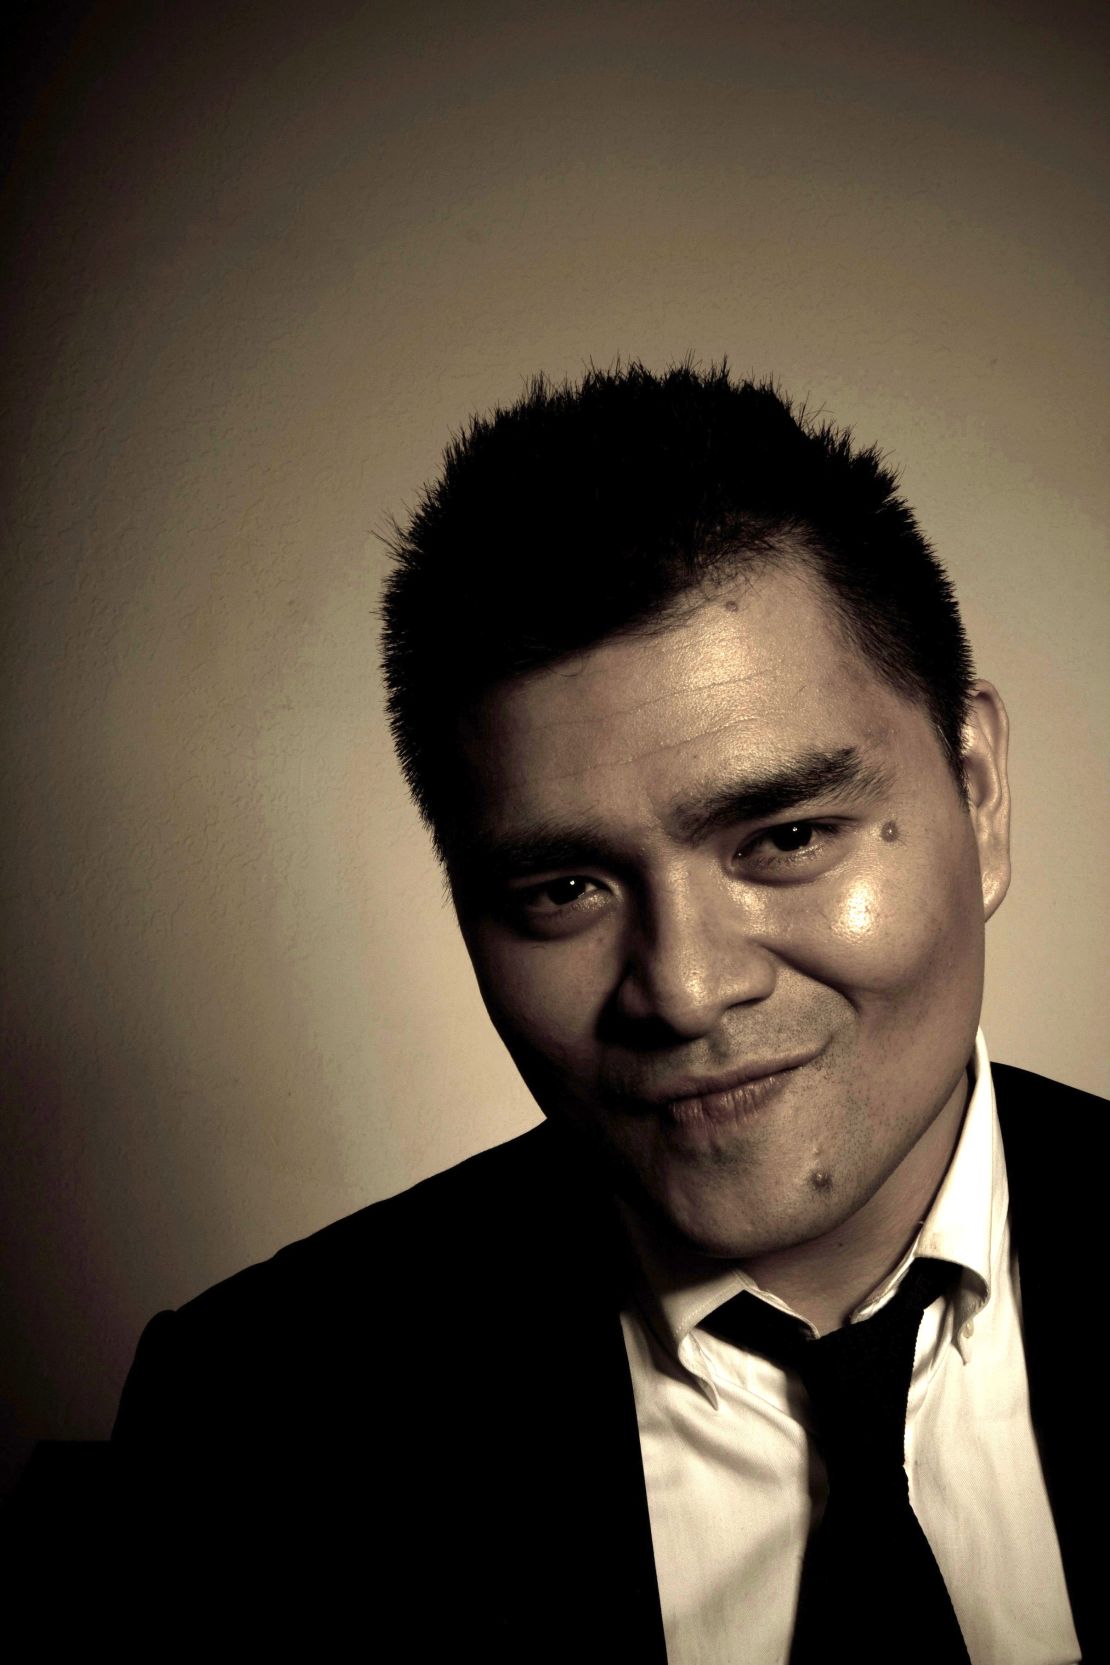 Jose Antonio Vargas says he'll now be able to see his mother after 21 years apart.